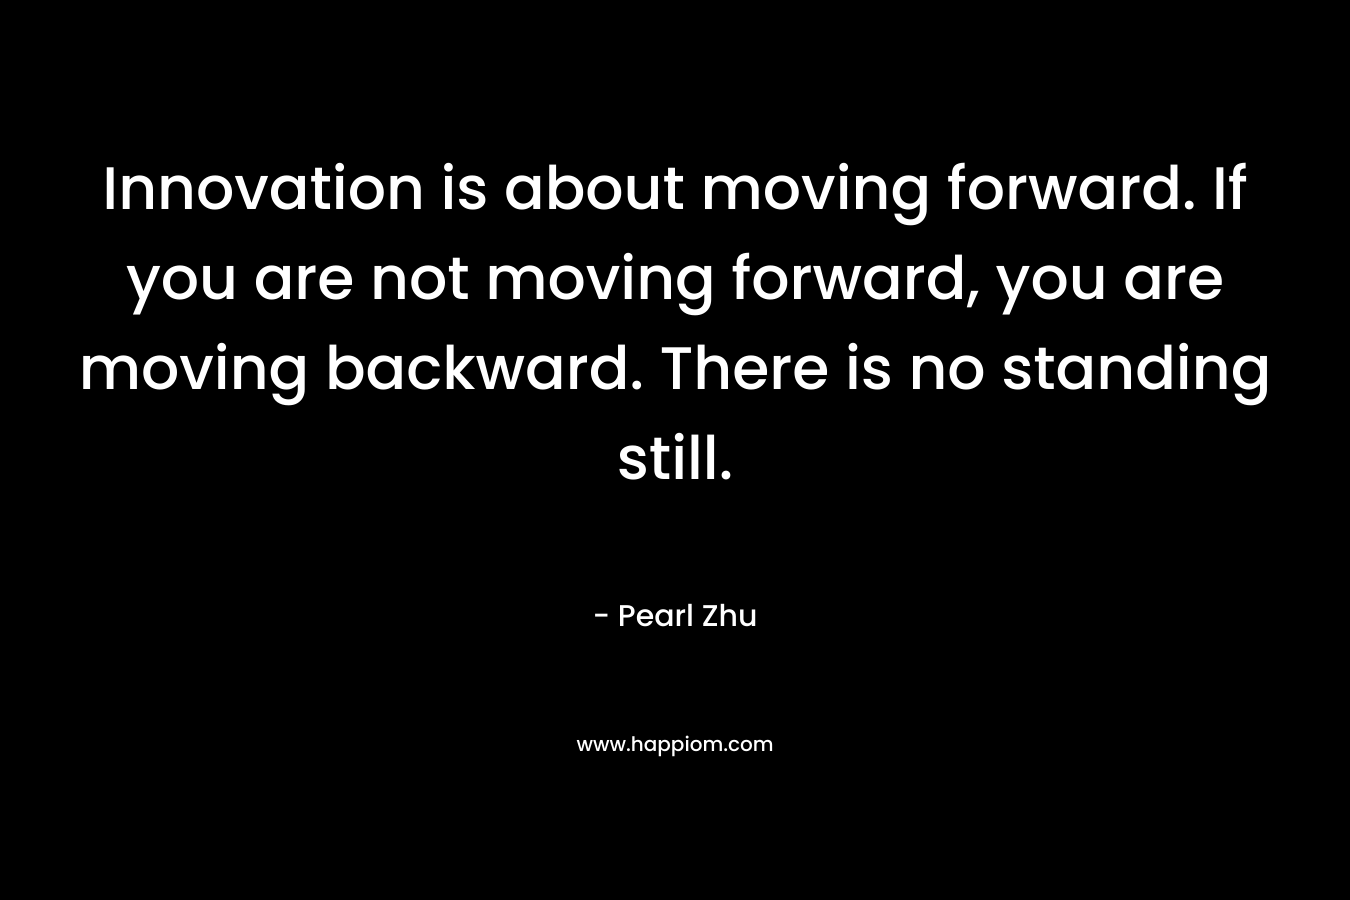 Innovation is about moving forward. If you are not moving forward, you are moving backward. There is no standing still.